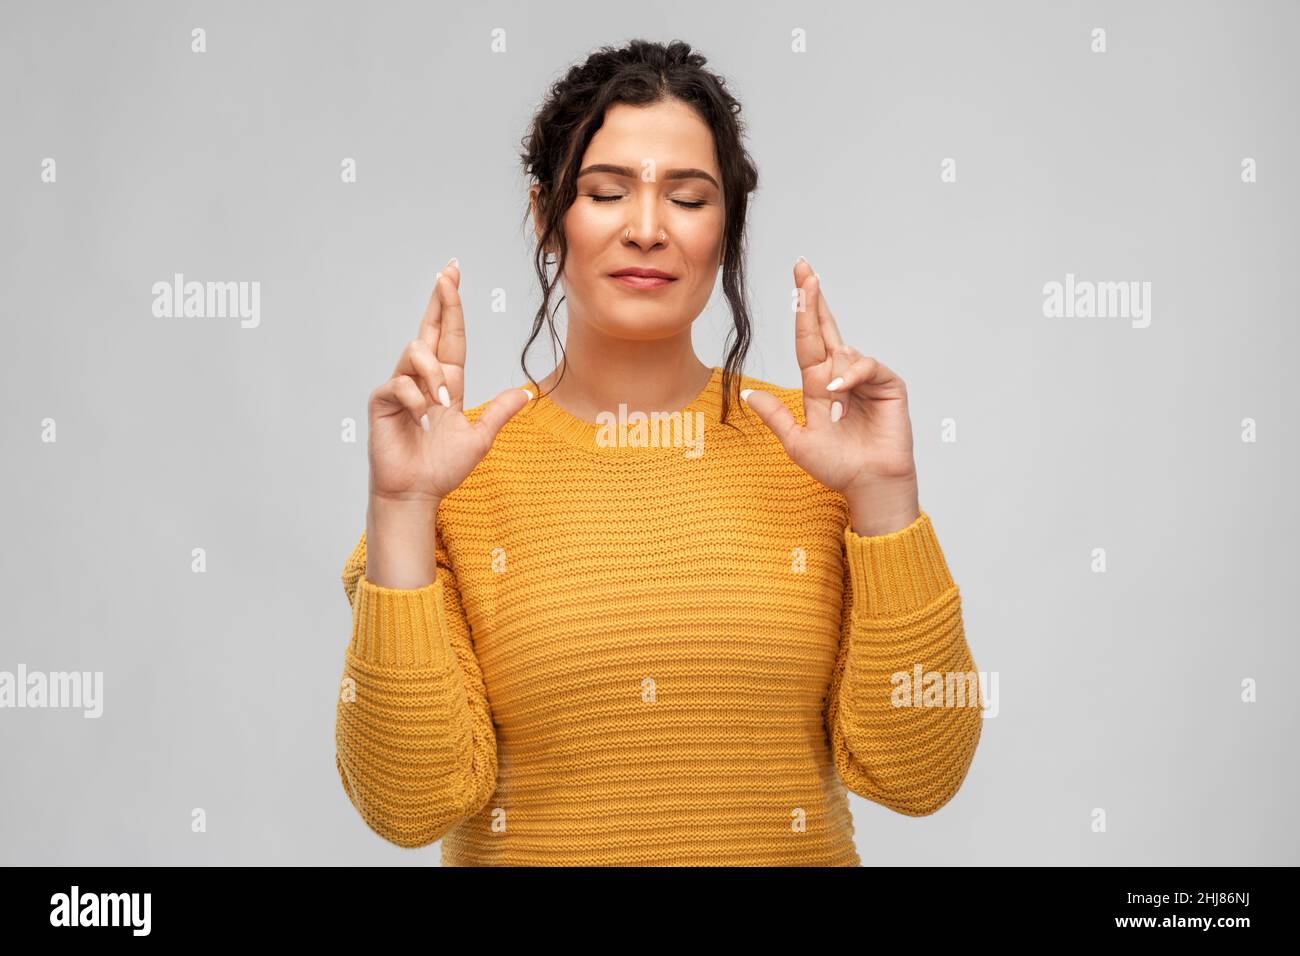 woman with pierced nose holding fingers crossed Stock Photo